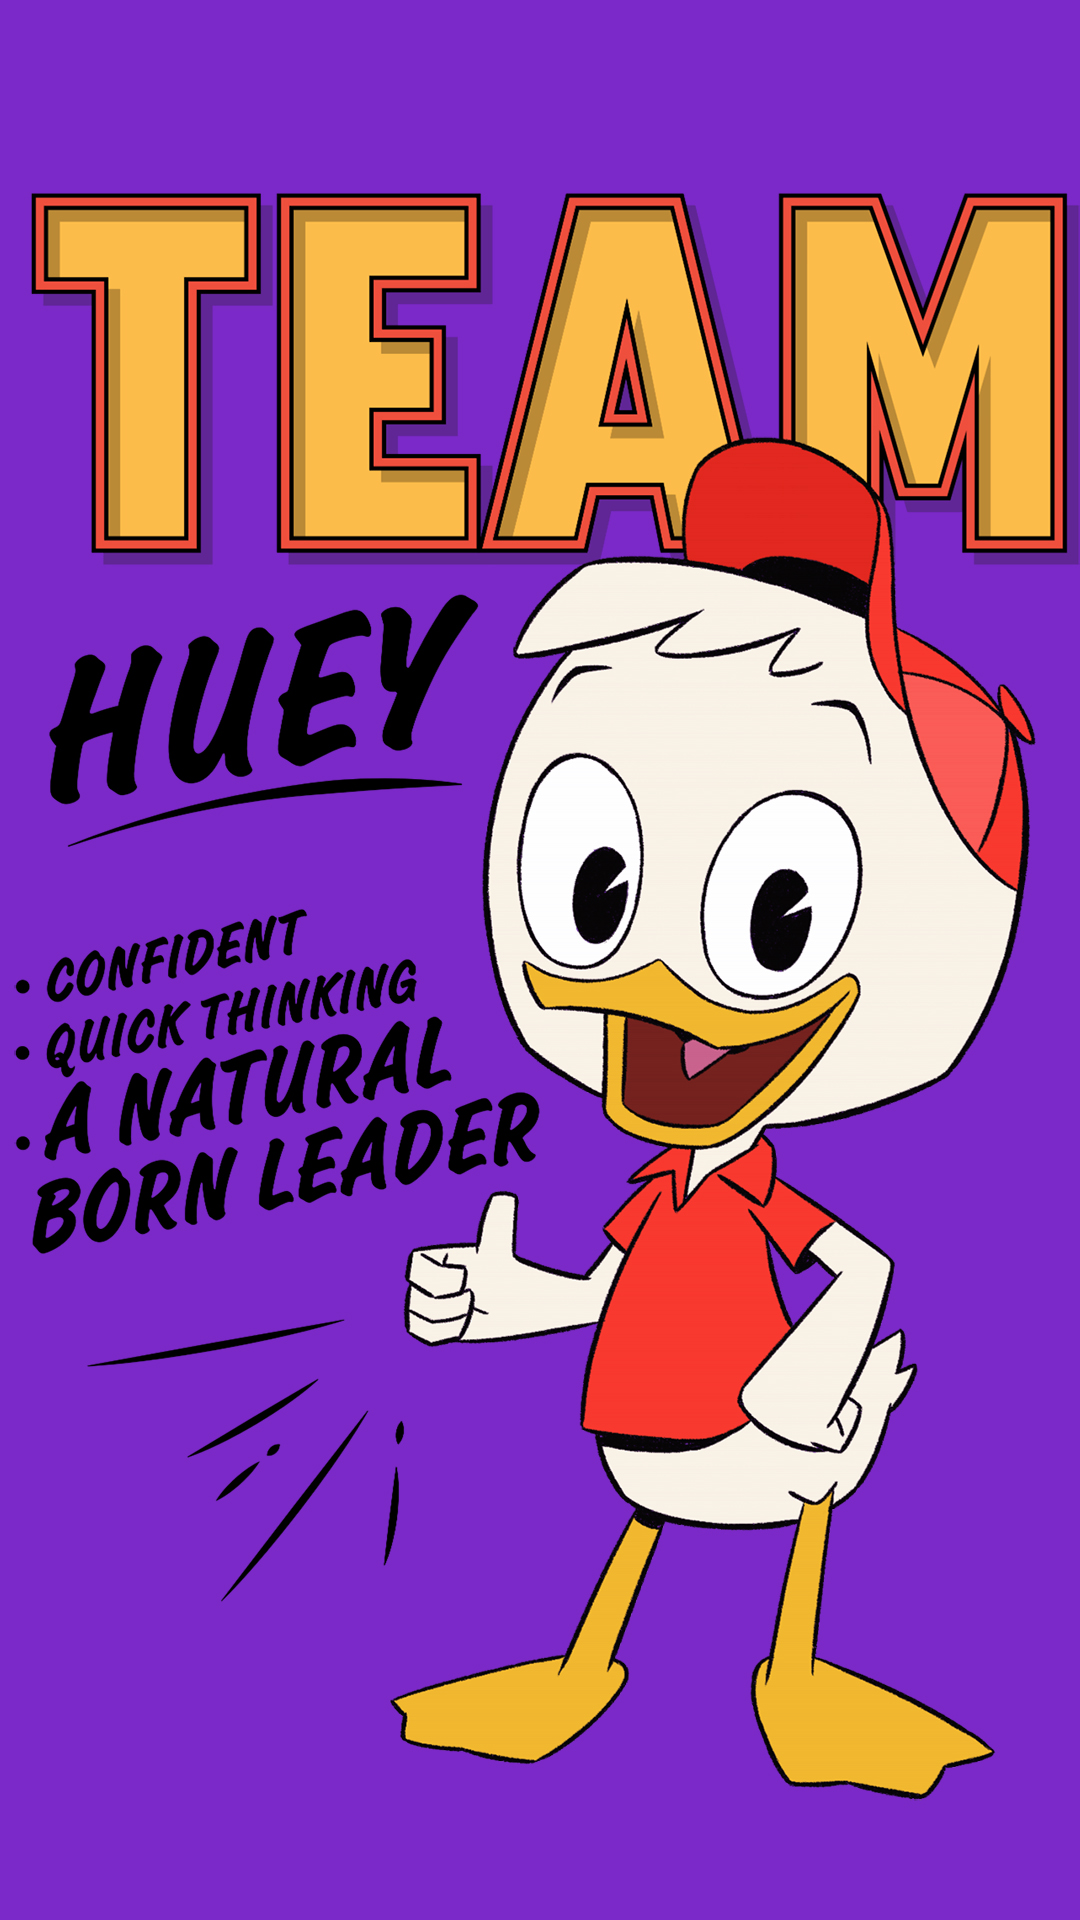 Ducktales Mobile Phone Wallpapers And Lockscreens - Ducktales Huey Dewey  Louie Wallpaper Phone - 1080x1920 Wallpaper 